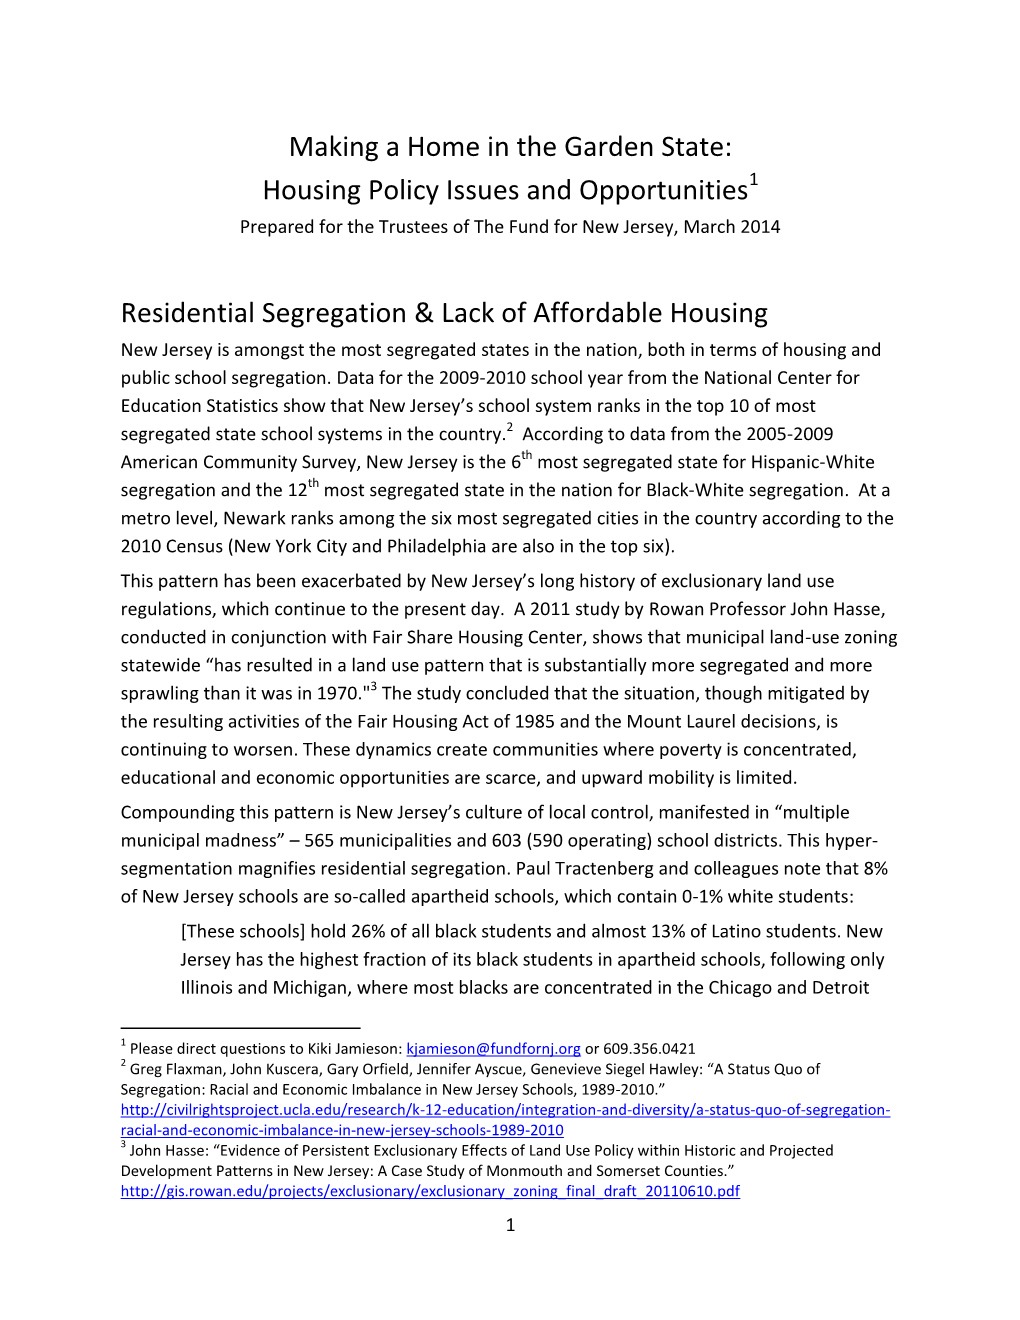 Housing Policy Issues and Opportunities Residential